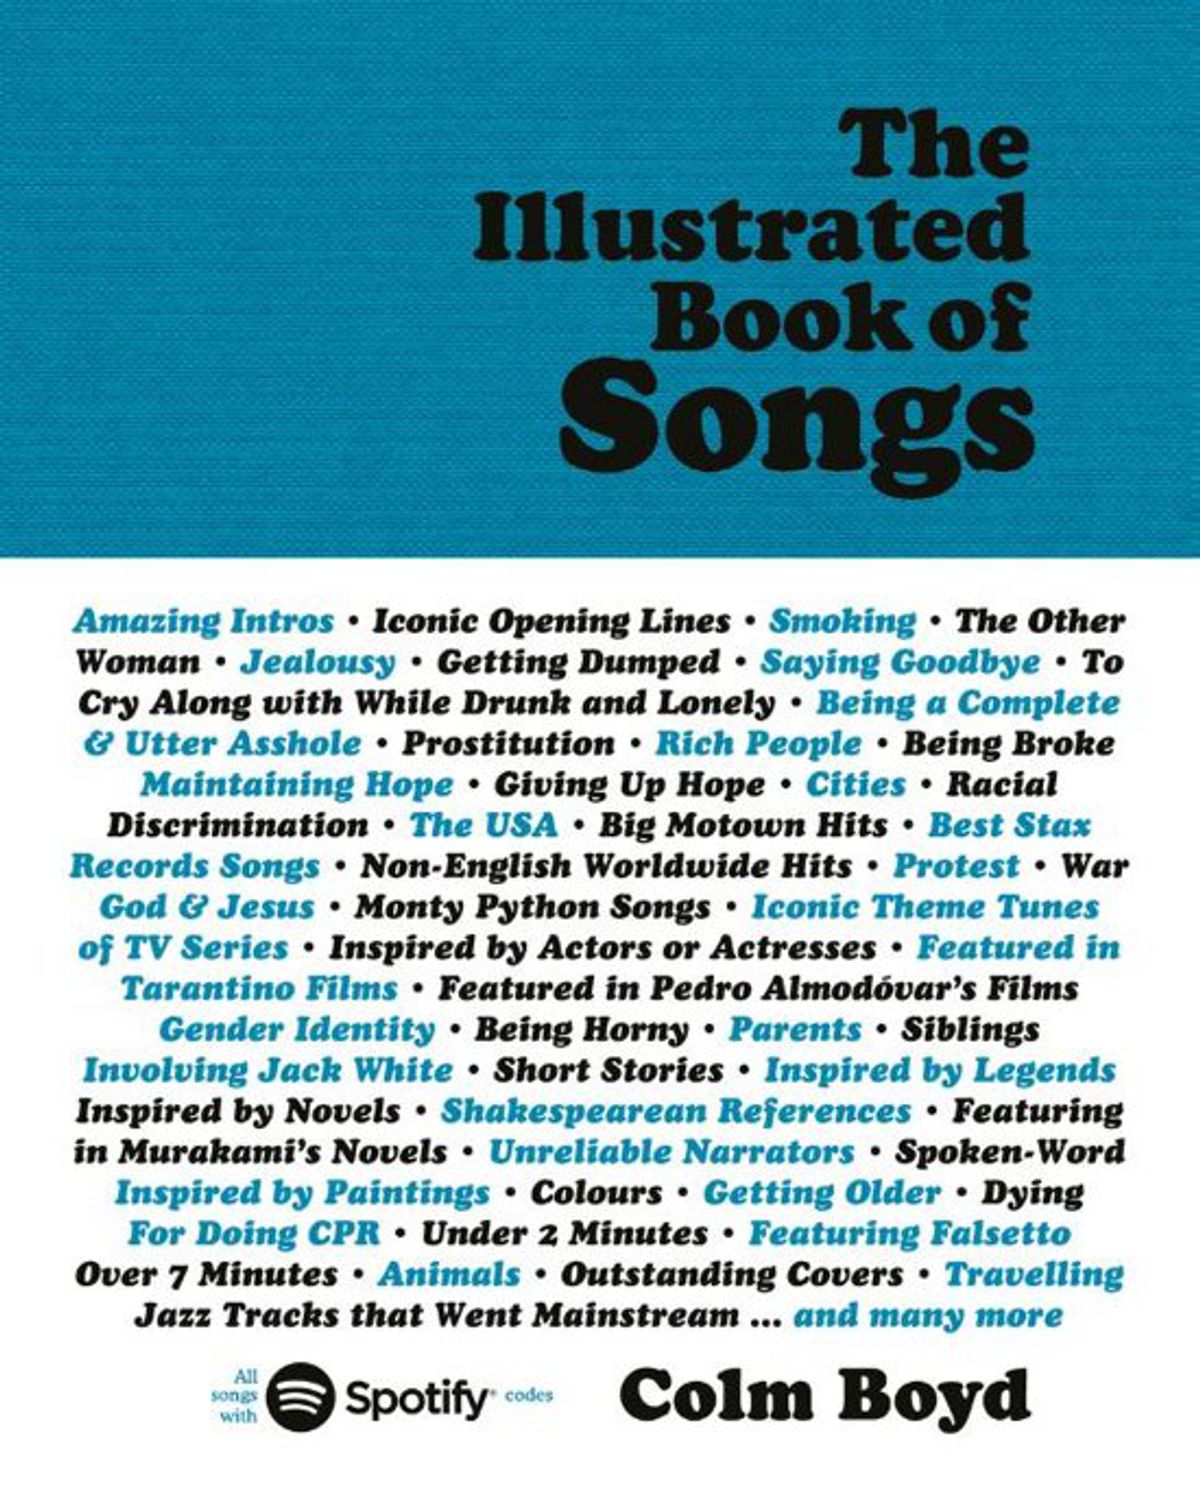 Colm Boyd - 'The Illustrated Book Of Songs'